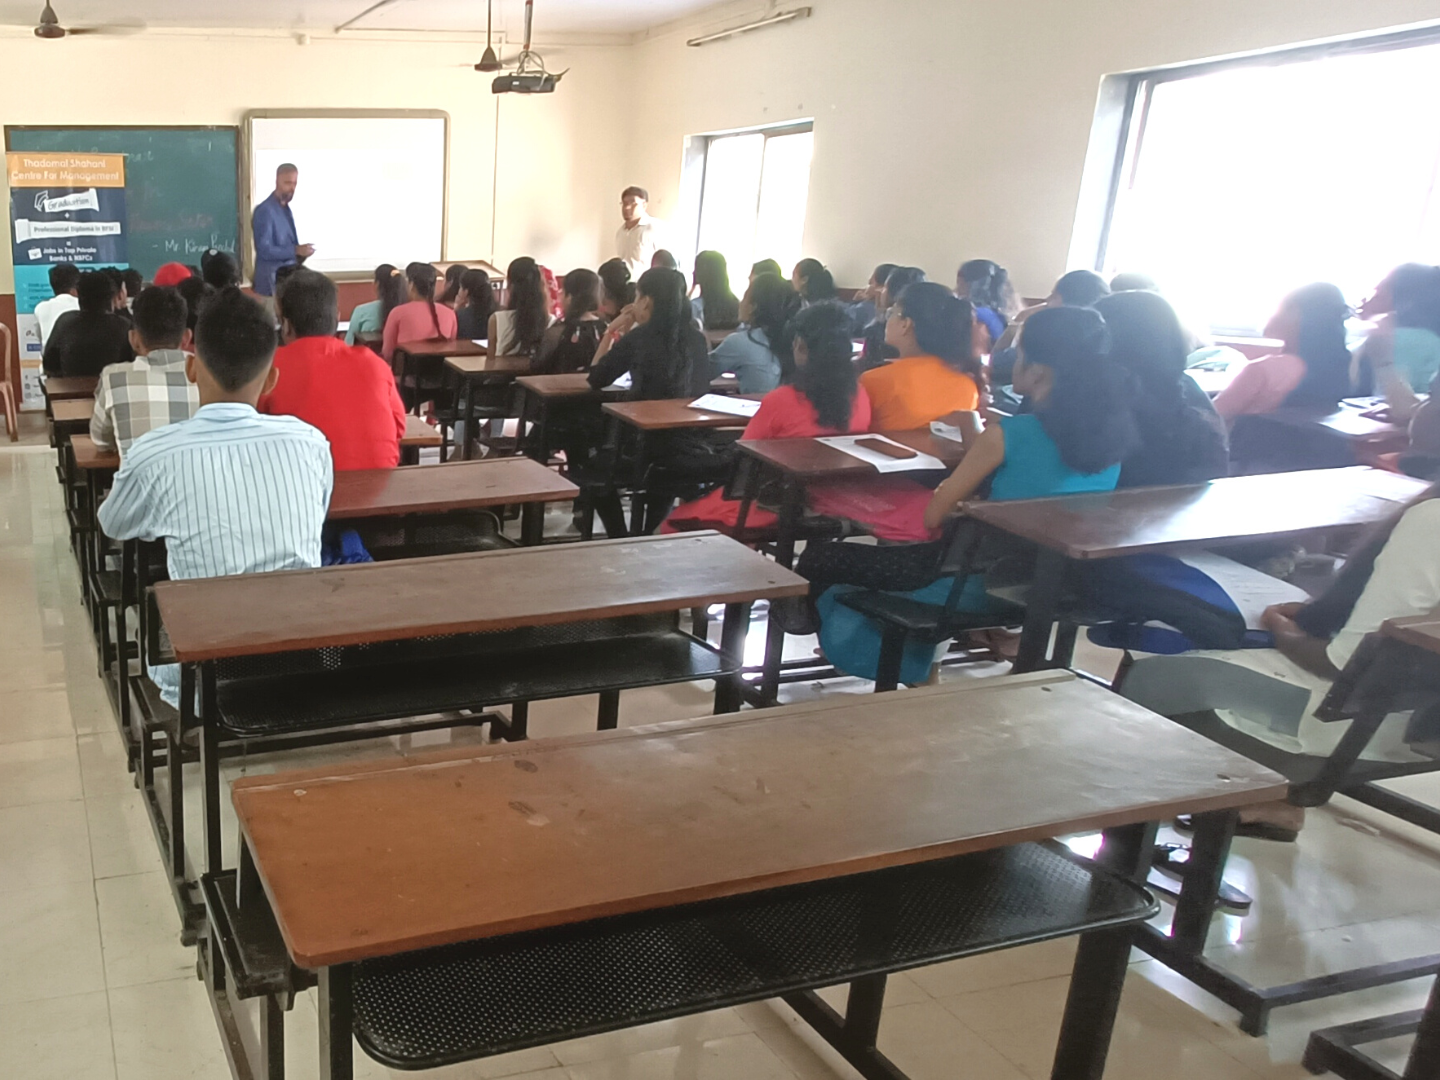 BFSI Seminar for students at D.V.S College